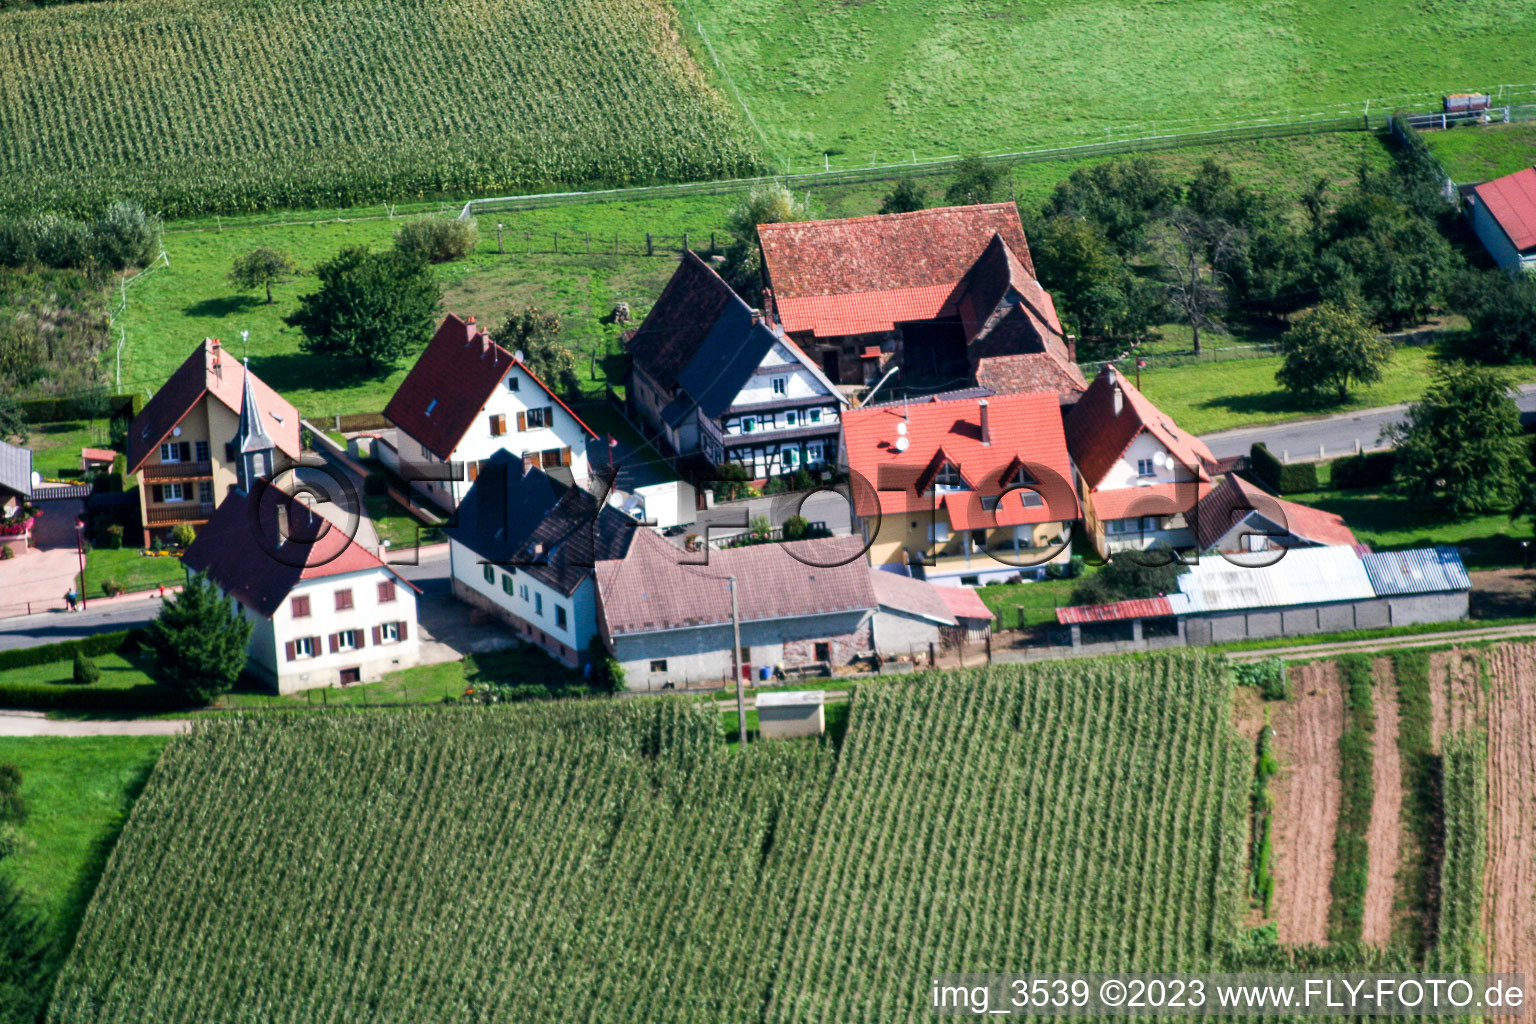 Drone image of Schleithal in the state Bas-Rhin, France